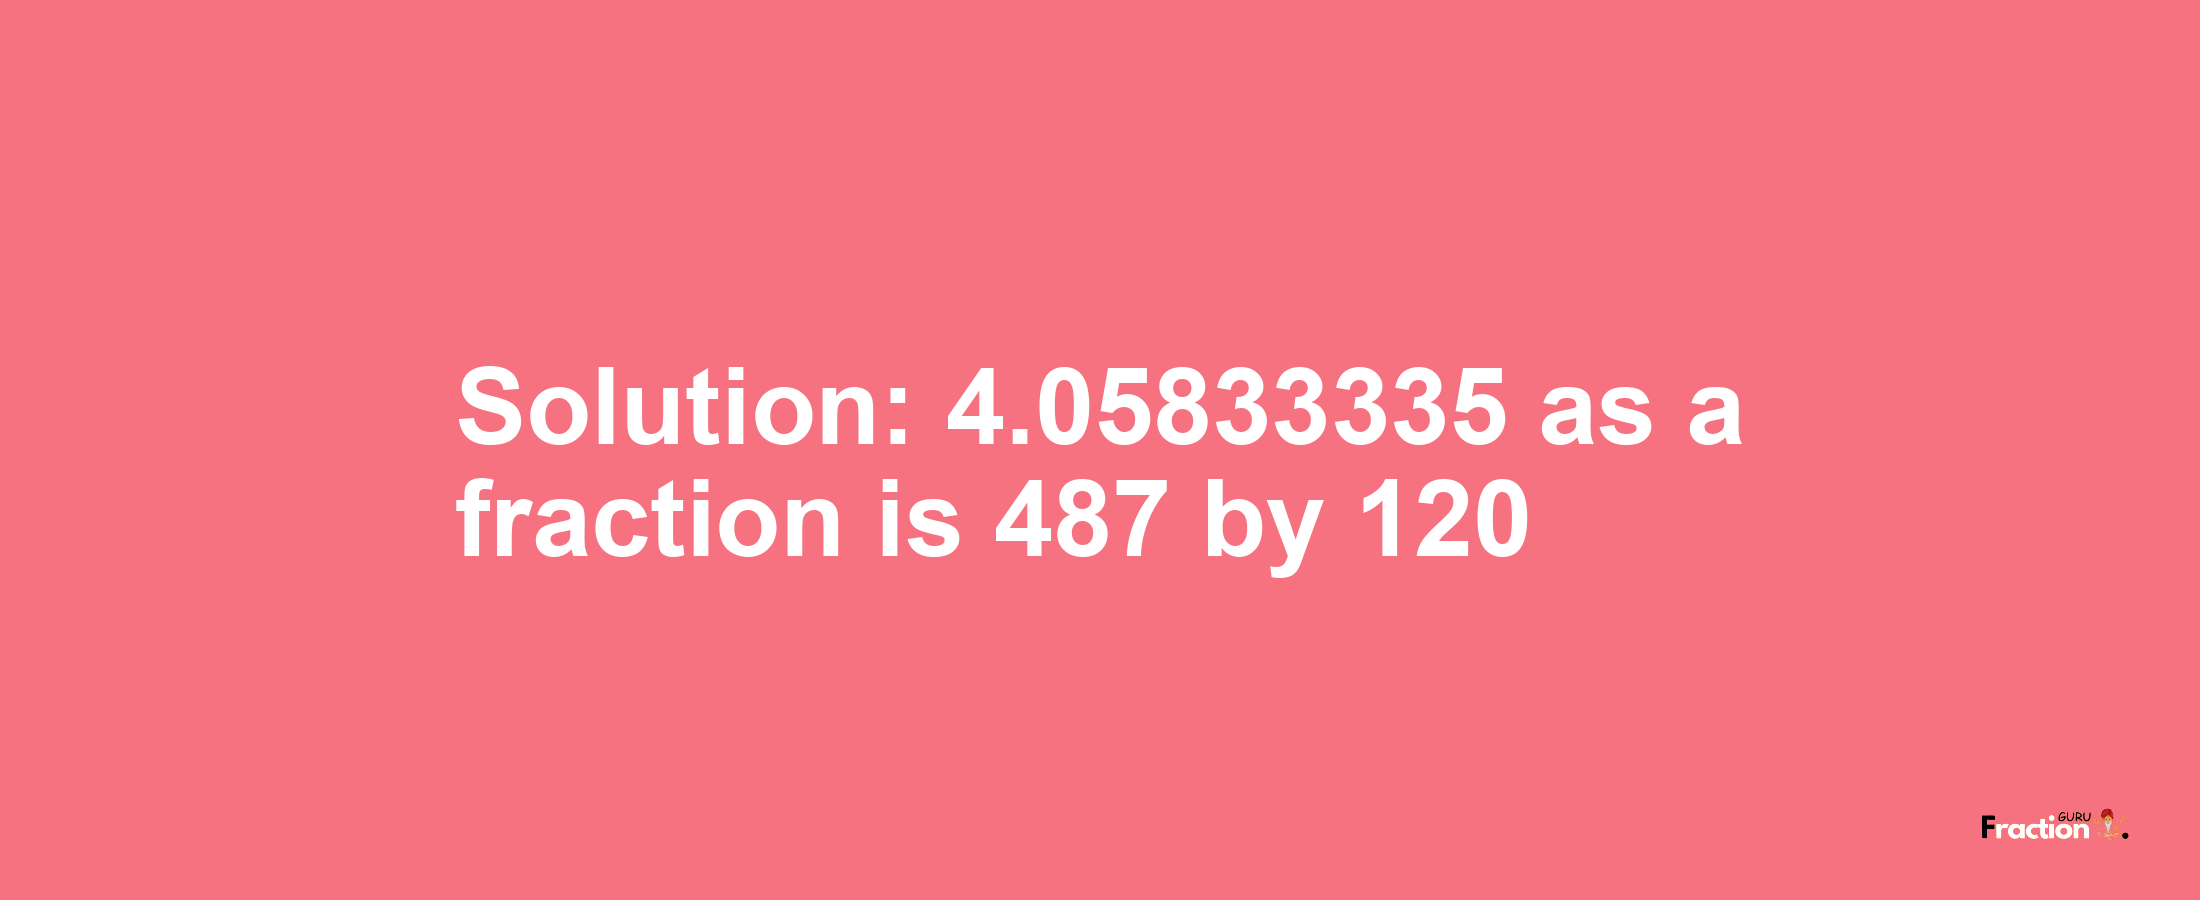 Solution:4.05833335 as a fraction is 487/120